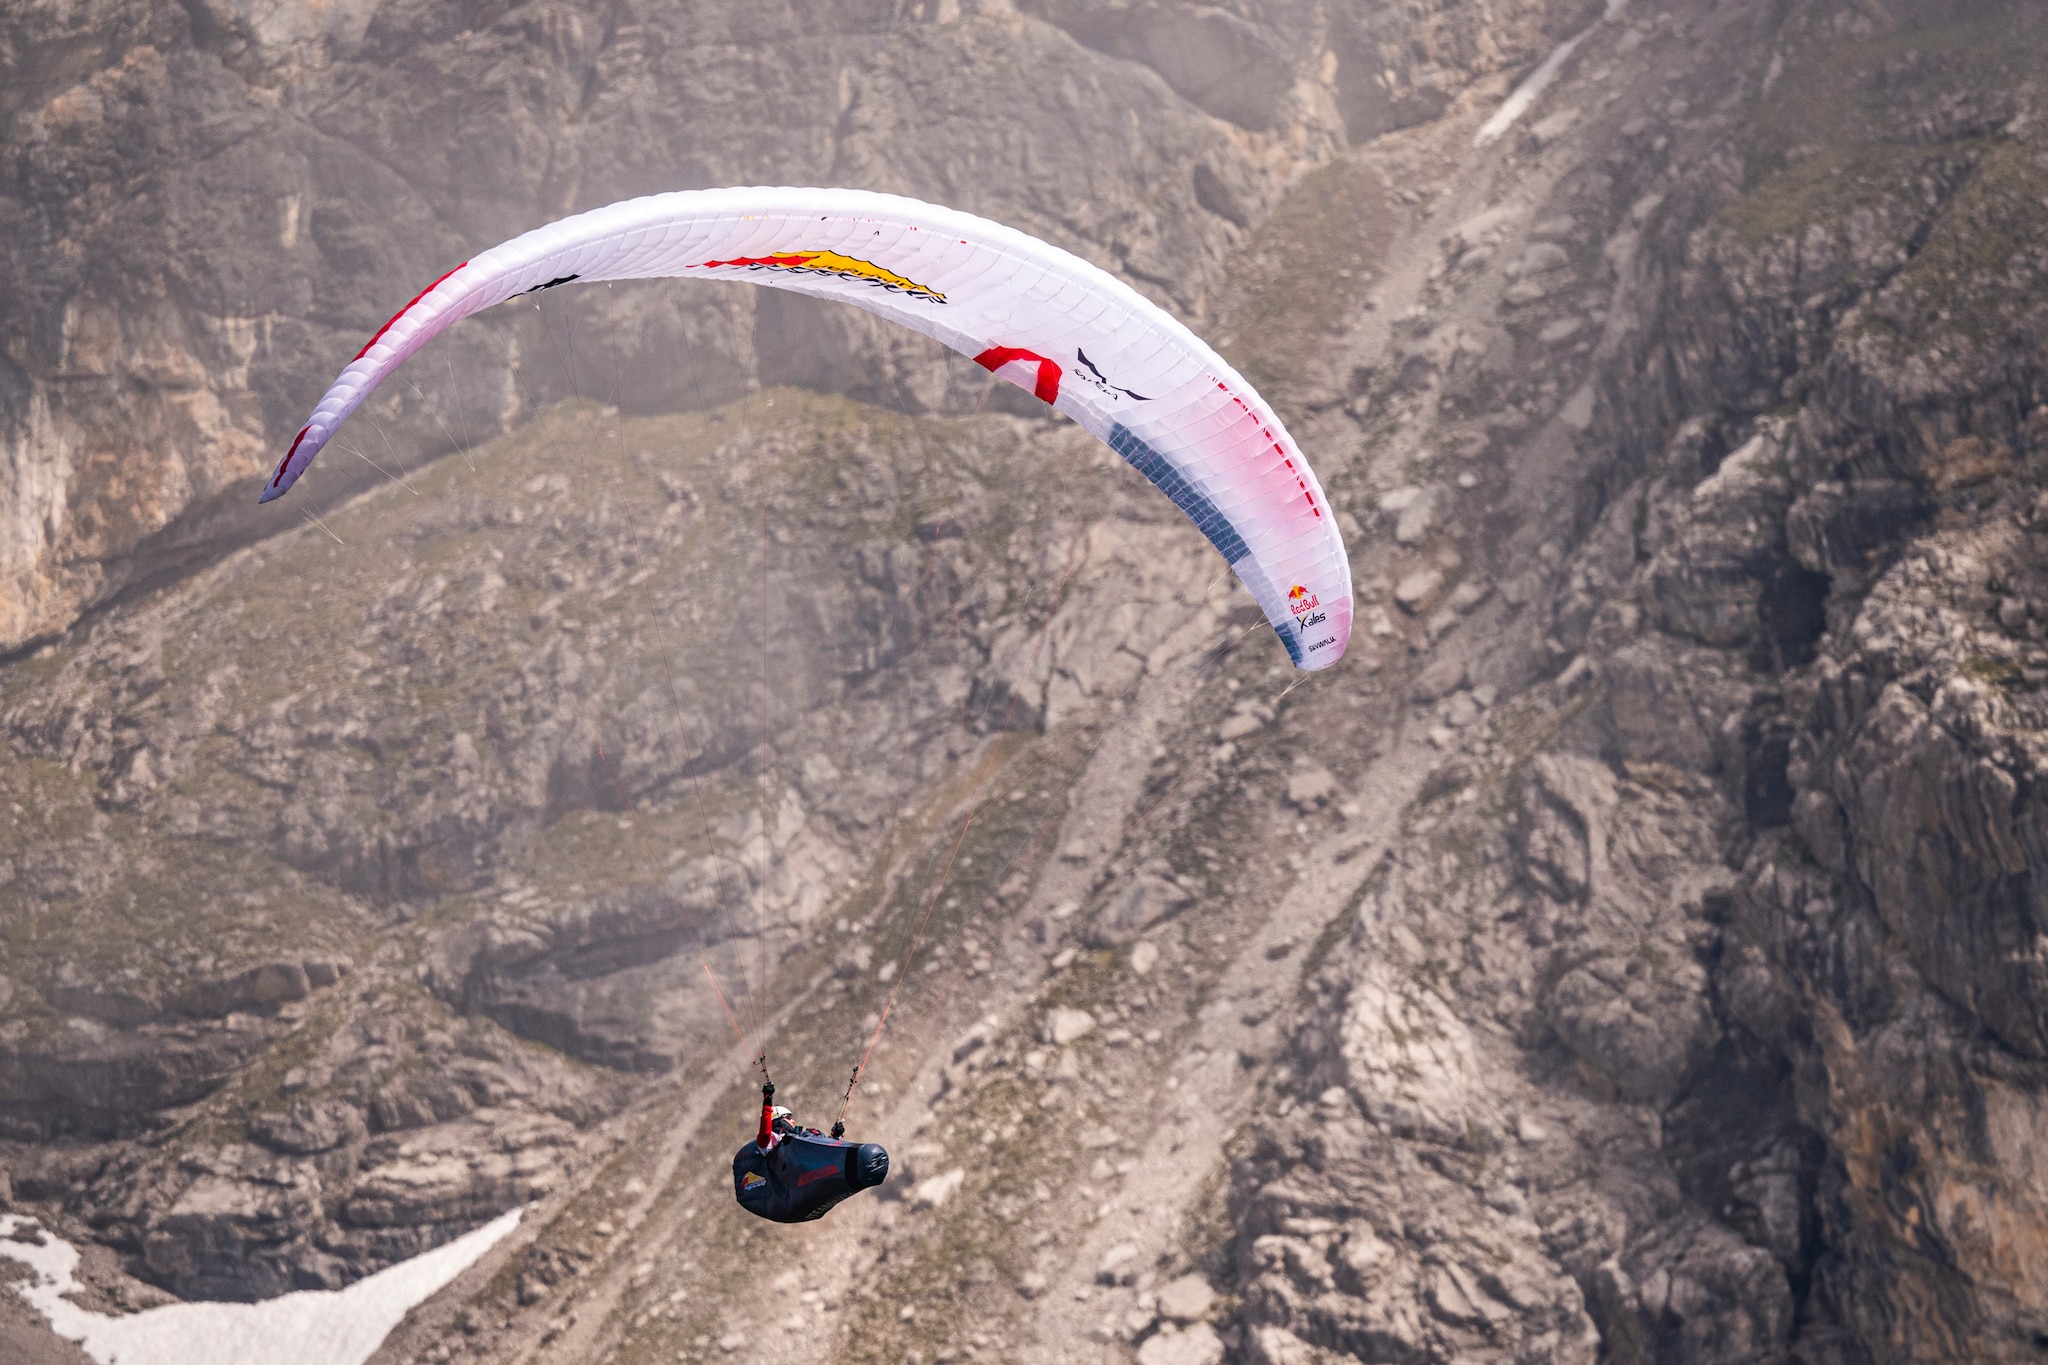 Simon Oberrauner (AUT2) performing during the Red Bull X-Alps in Montafon / Austria on 23-June-2021. In this endurance adventure race athletes from 18 nations have to fly with paragliders or hike from Salzburg along the alps towards France, around the Mont Blanc back to Salzburg.